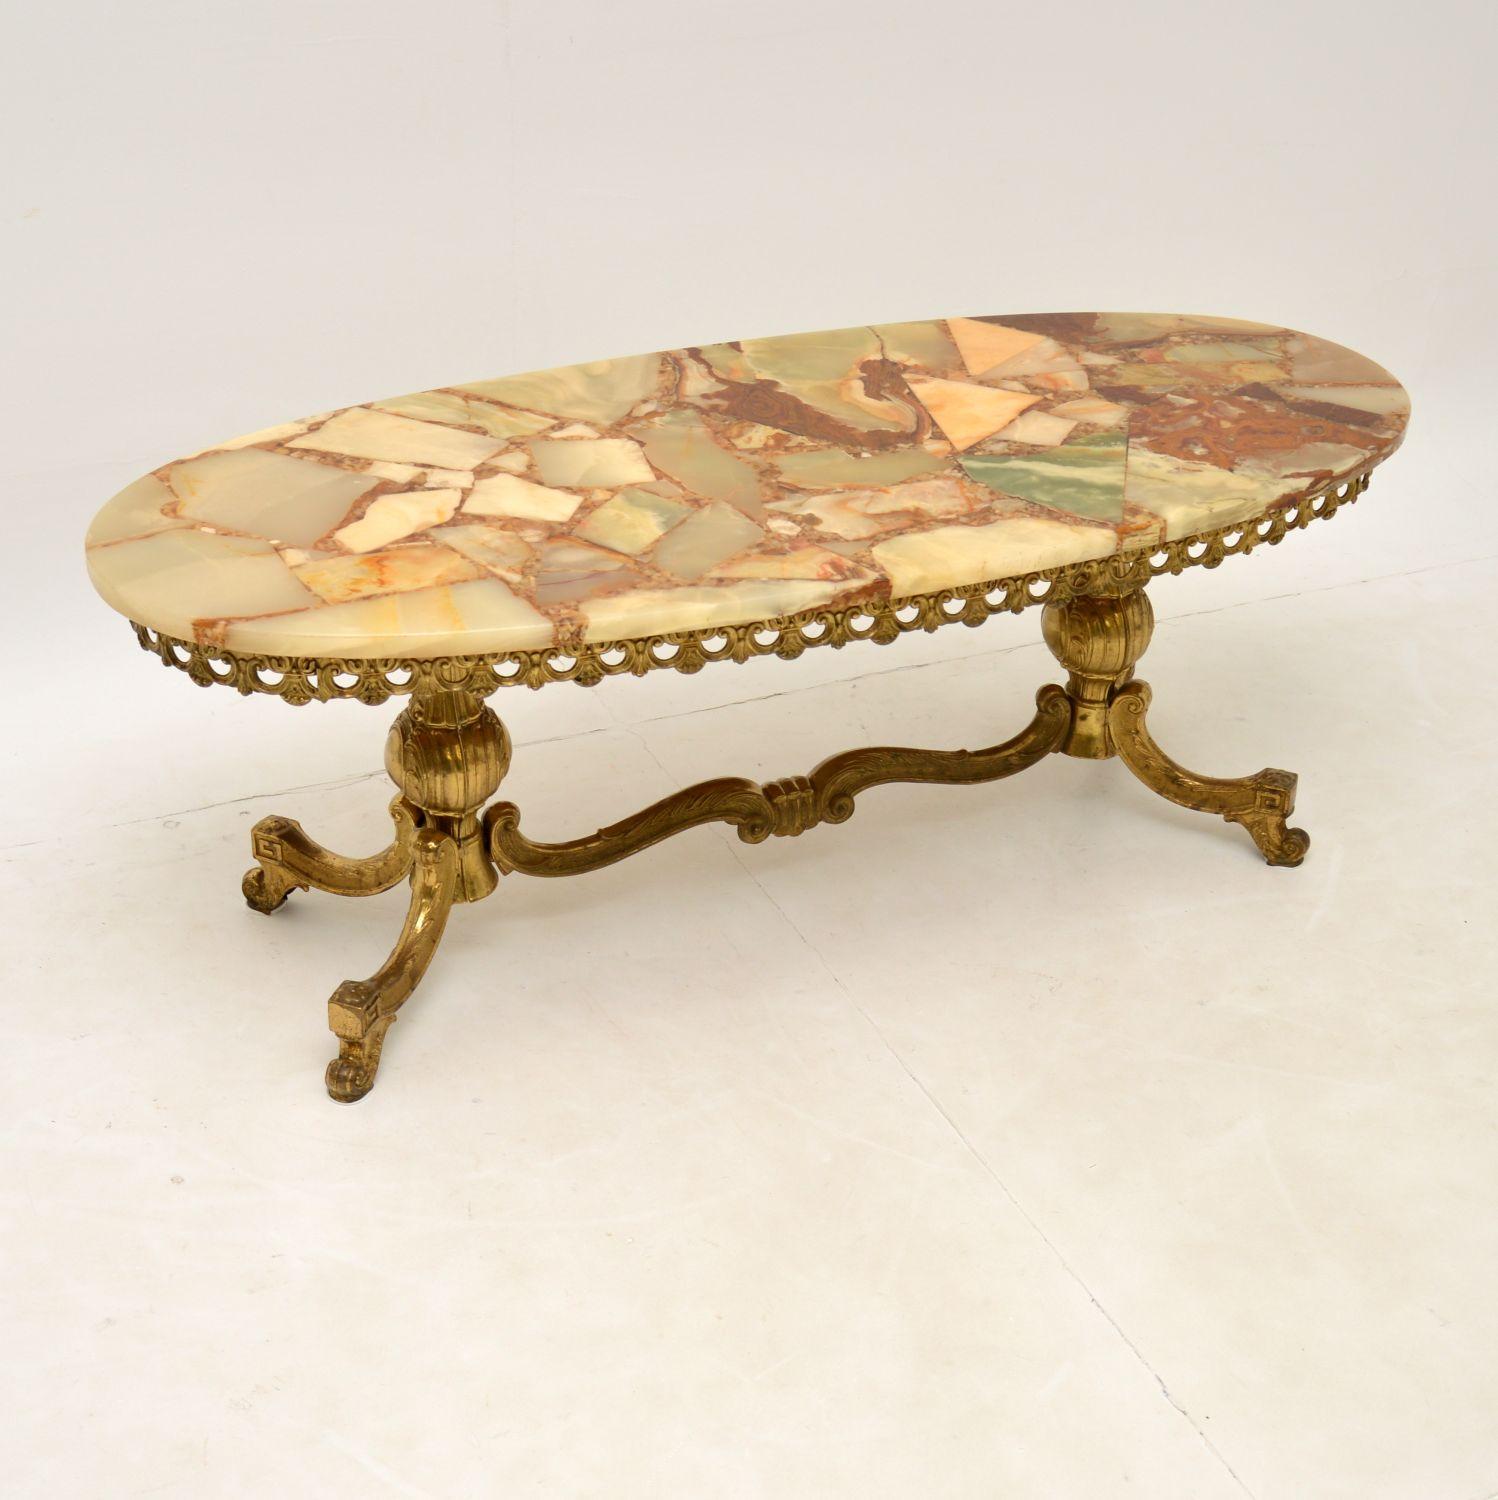 A beautiful and striking antique French style coffee table. This was made in France or Italy and dates from the 1950’s.

The quality is excellent, with a very well made solid brass frame. The loose onyx top is stunning and is made from a patchwork